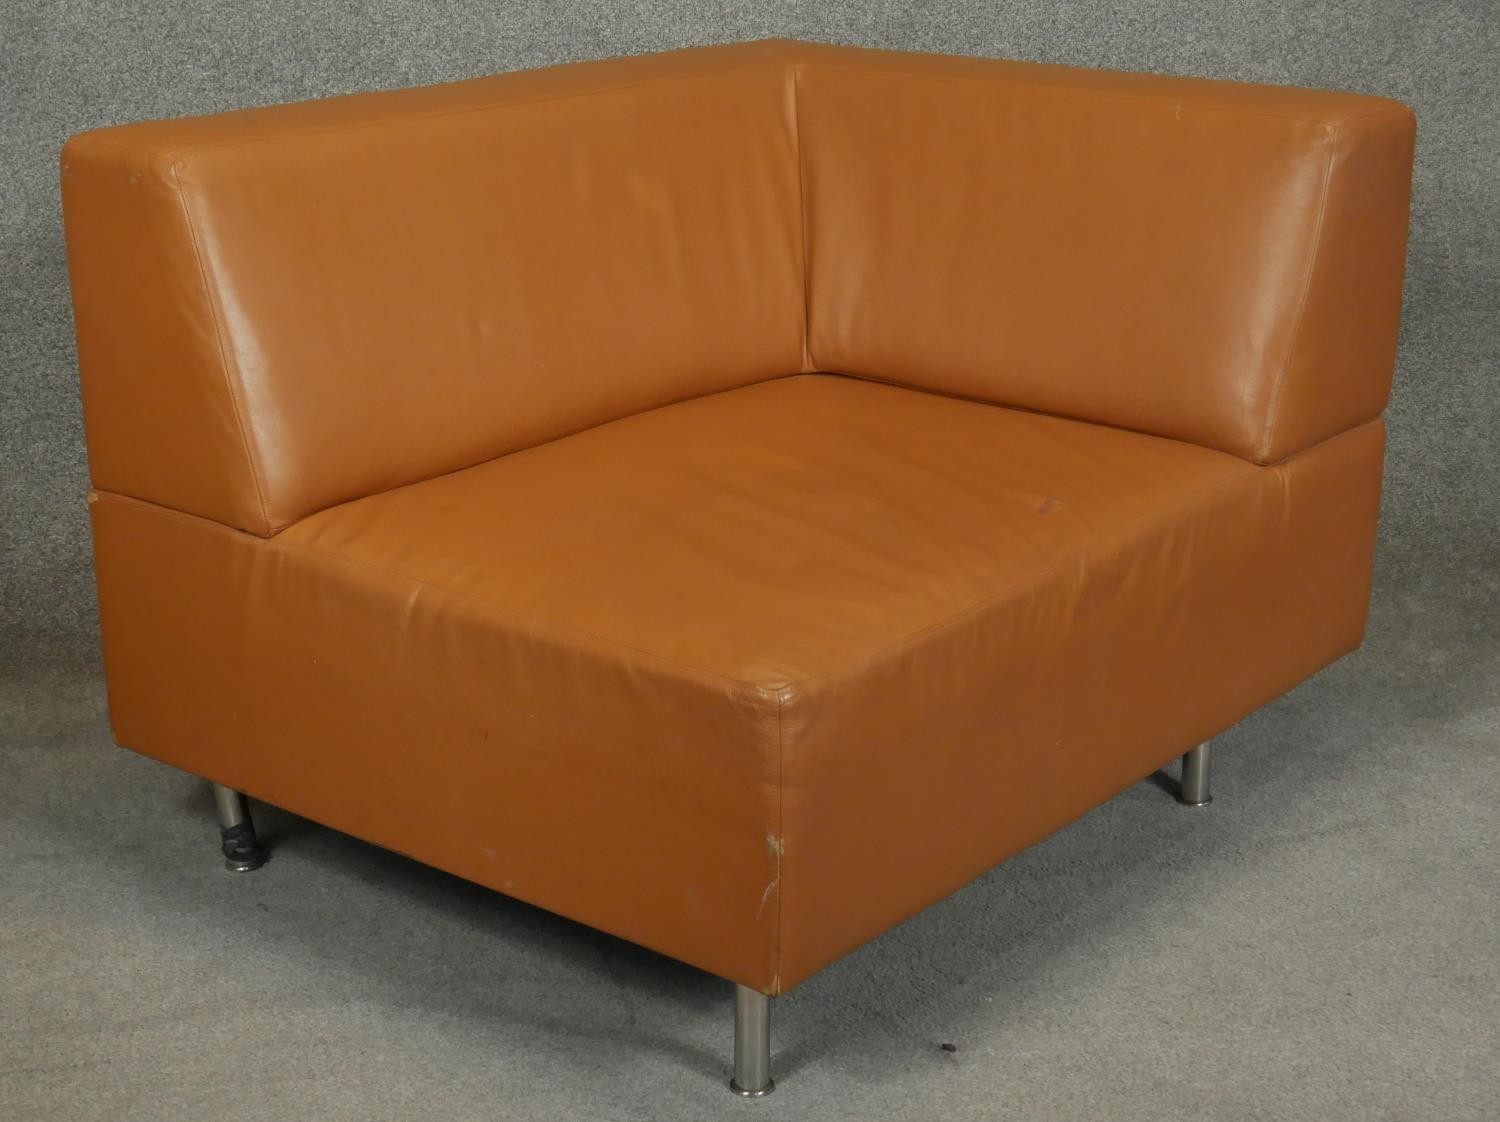 A contemporary Hay 'Mags' two section modular sofa upholstered in light tan leather. H.78 L.220 D. - Image 4 of 4